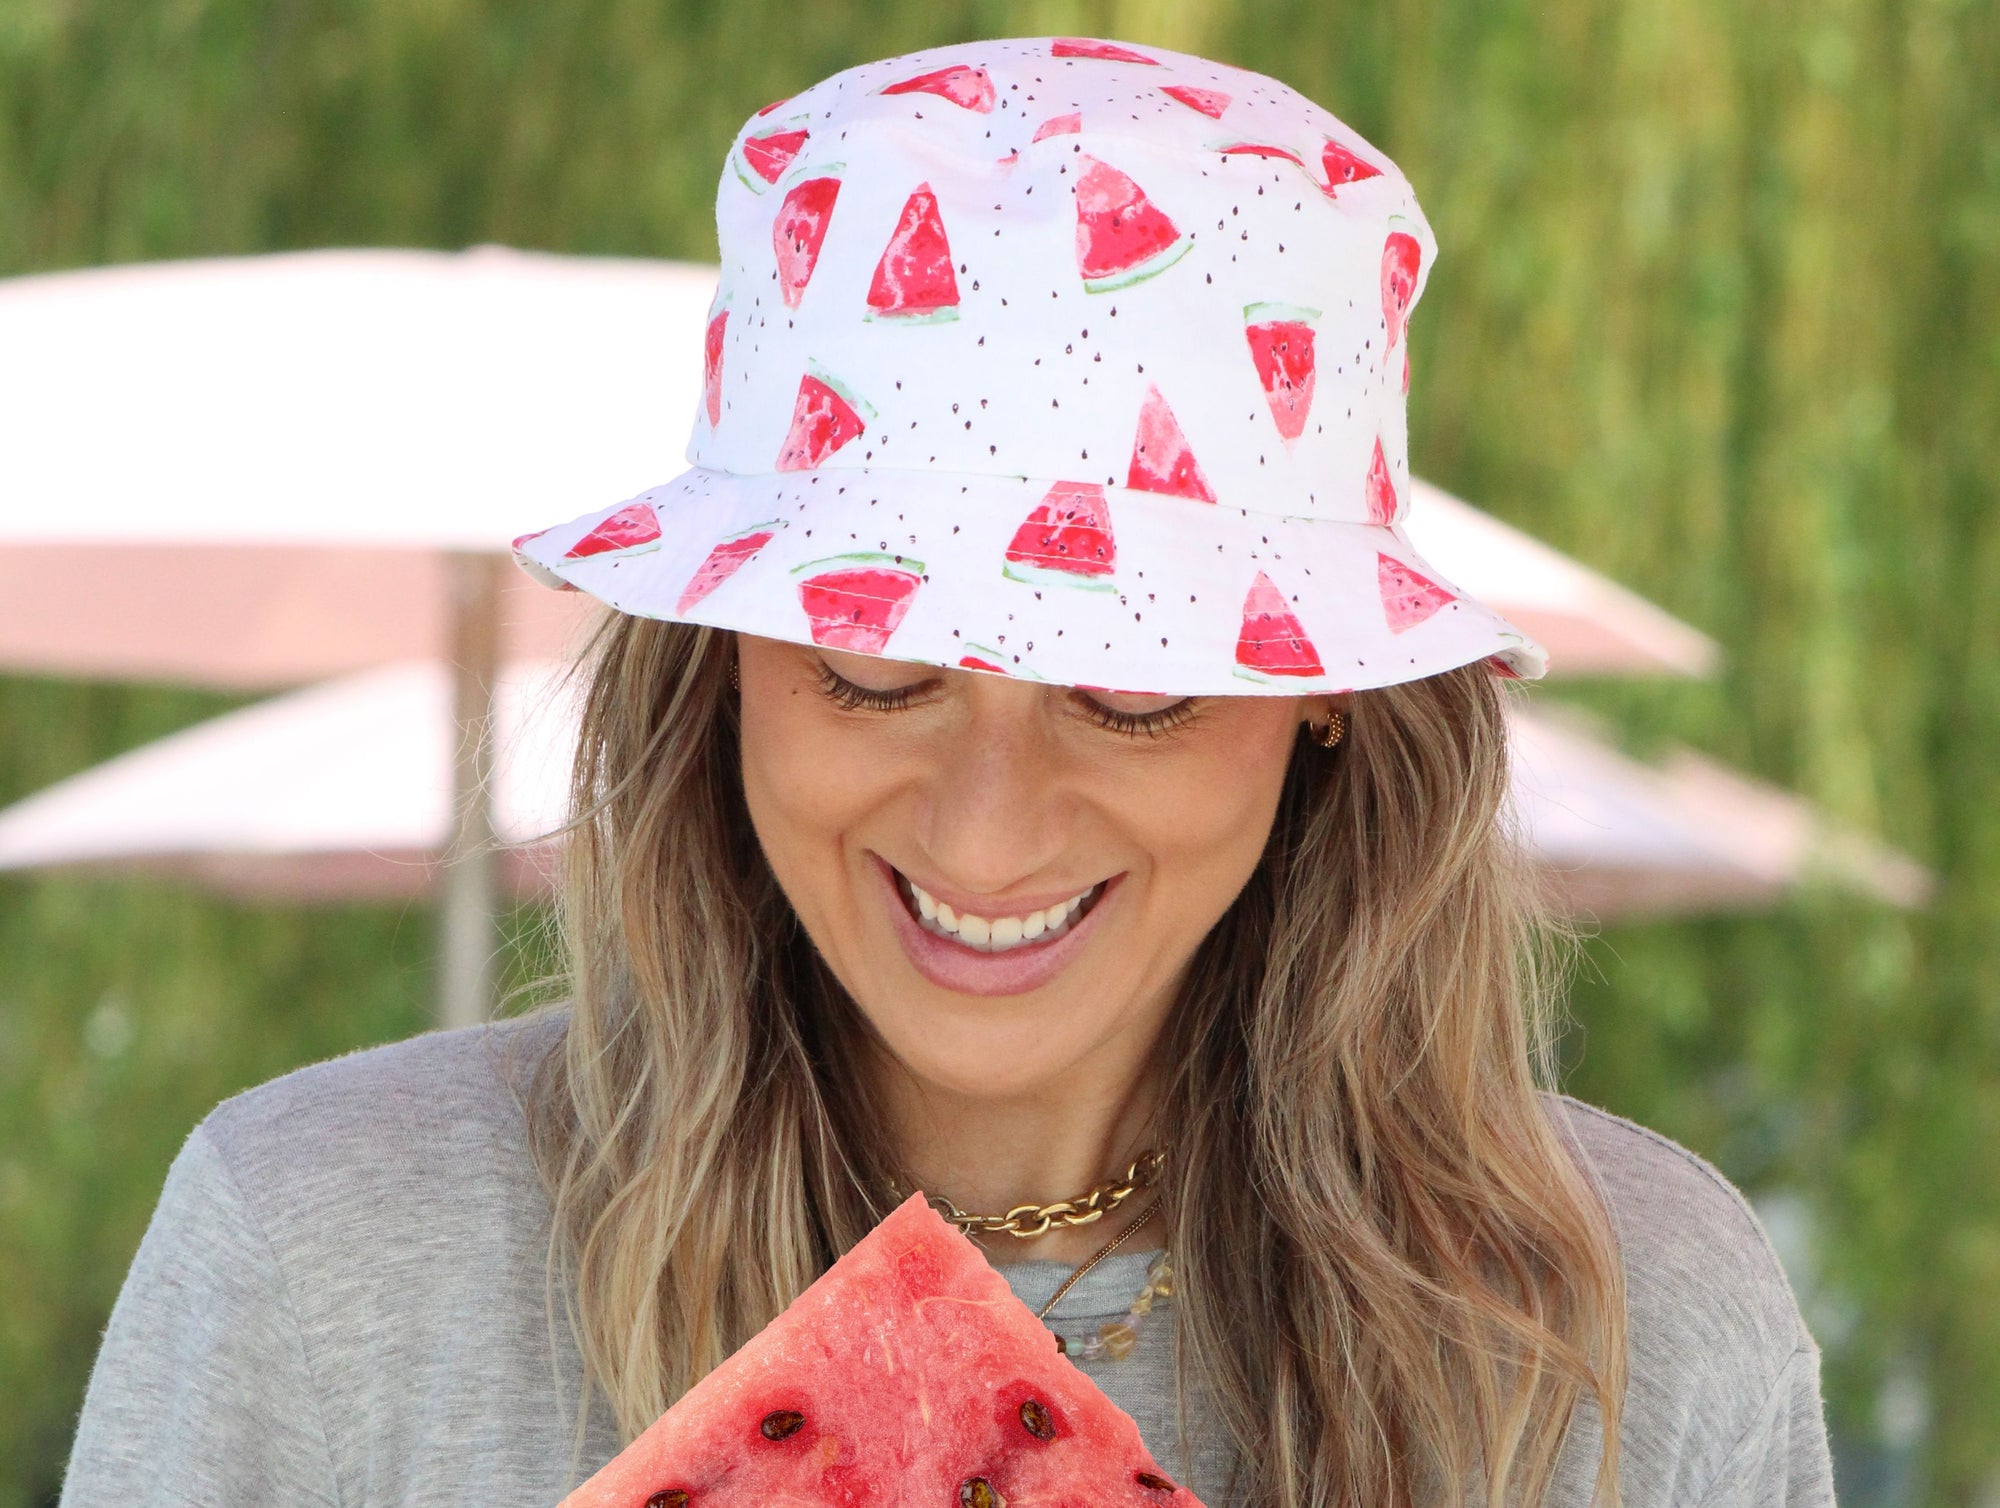 Retro print cotton bucket hats perfect for a beach party, volleyball game or pool party.  Gorgeous garden print wide brim hats for puttering the afternoon away in your garden. UPF50 Sun Protection. Made in Canada by Puffin Gear